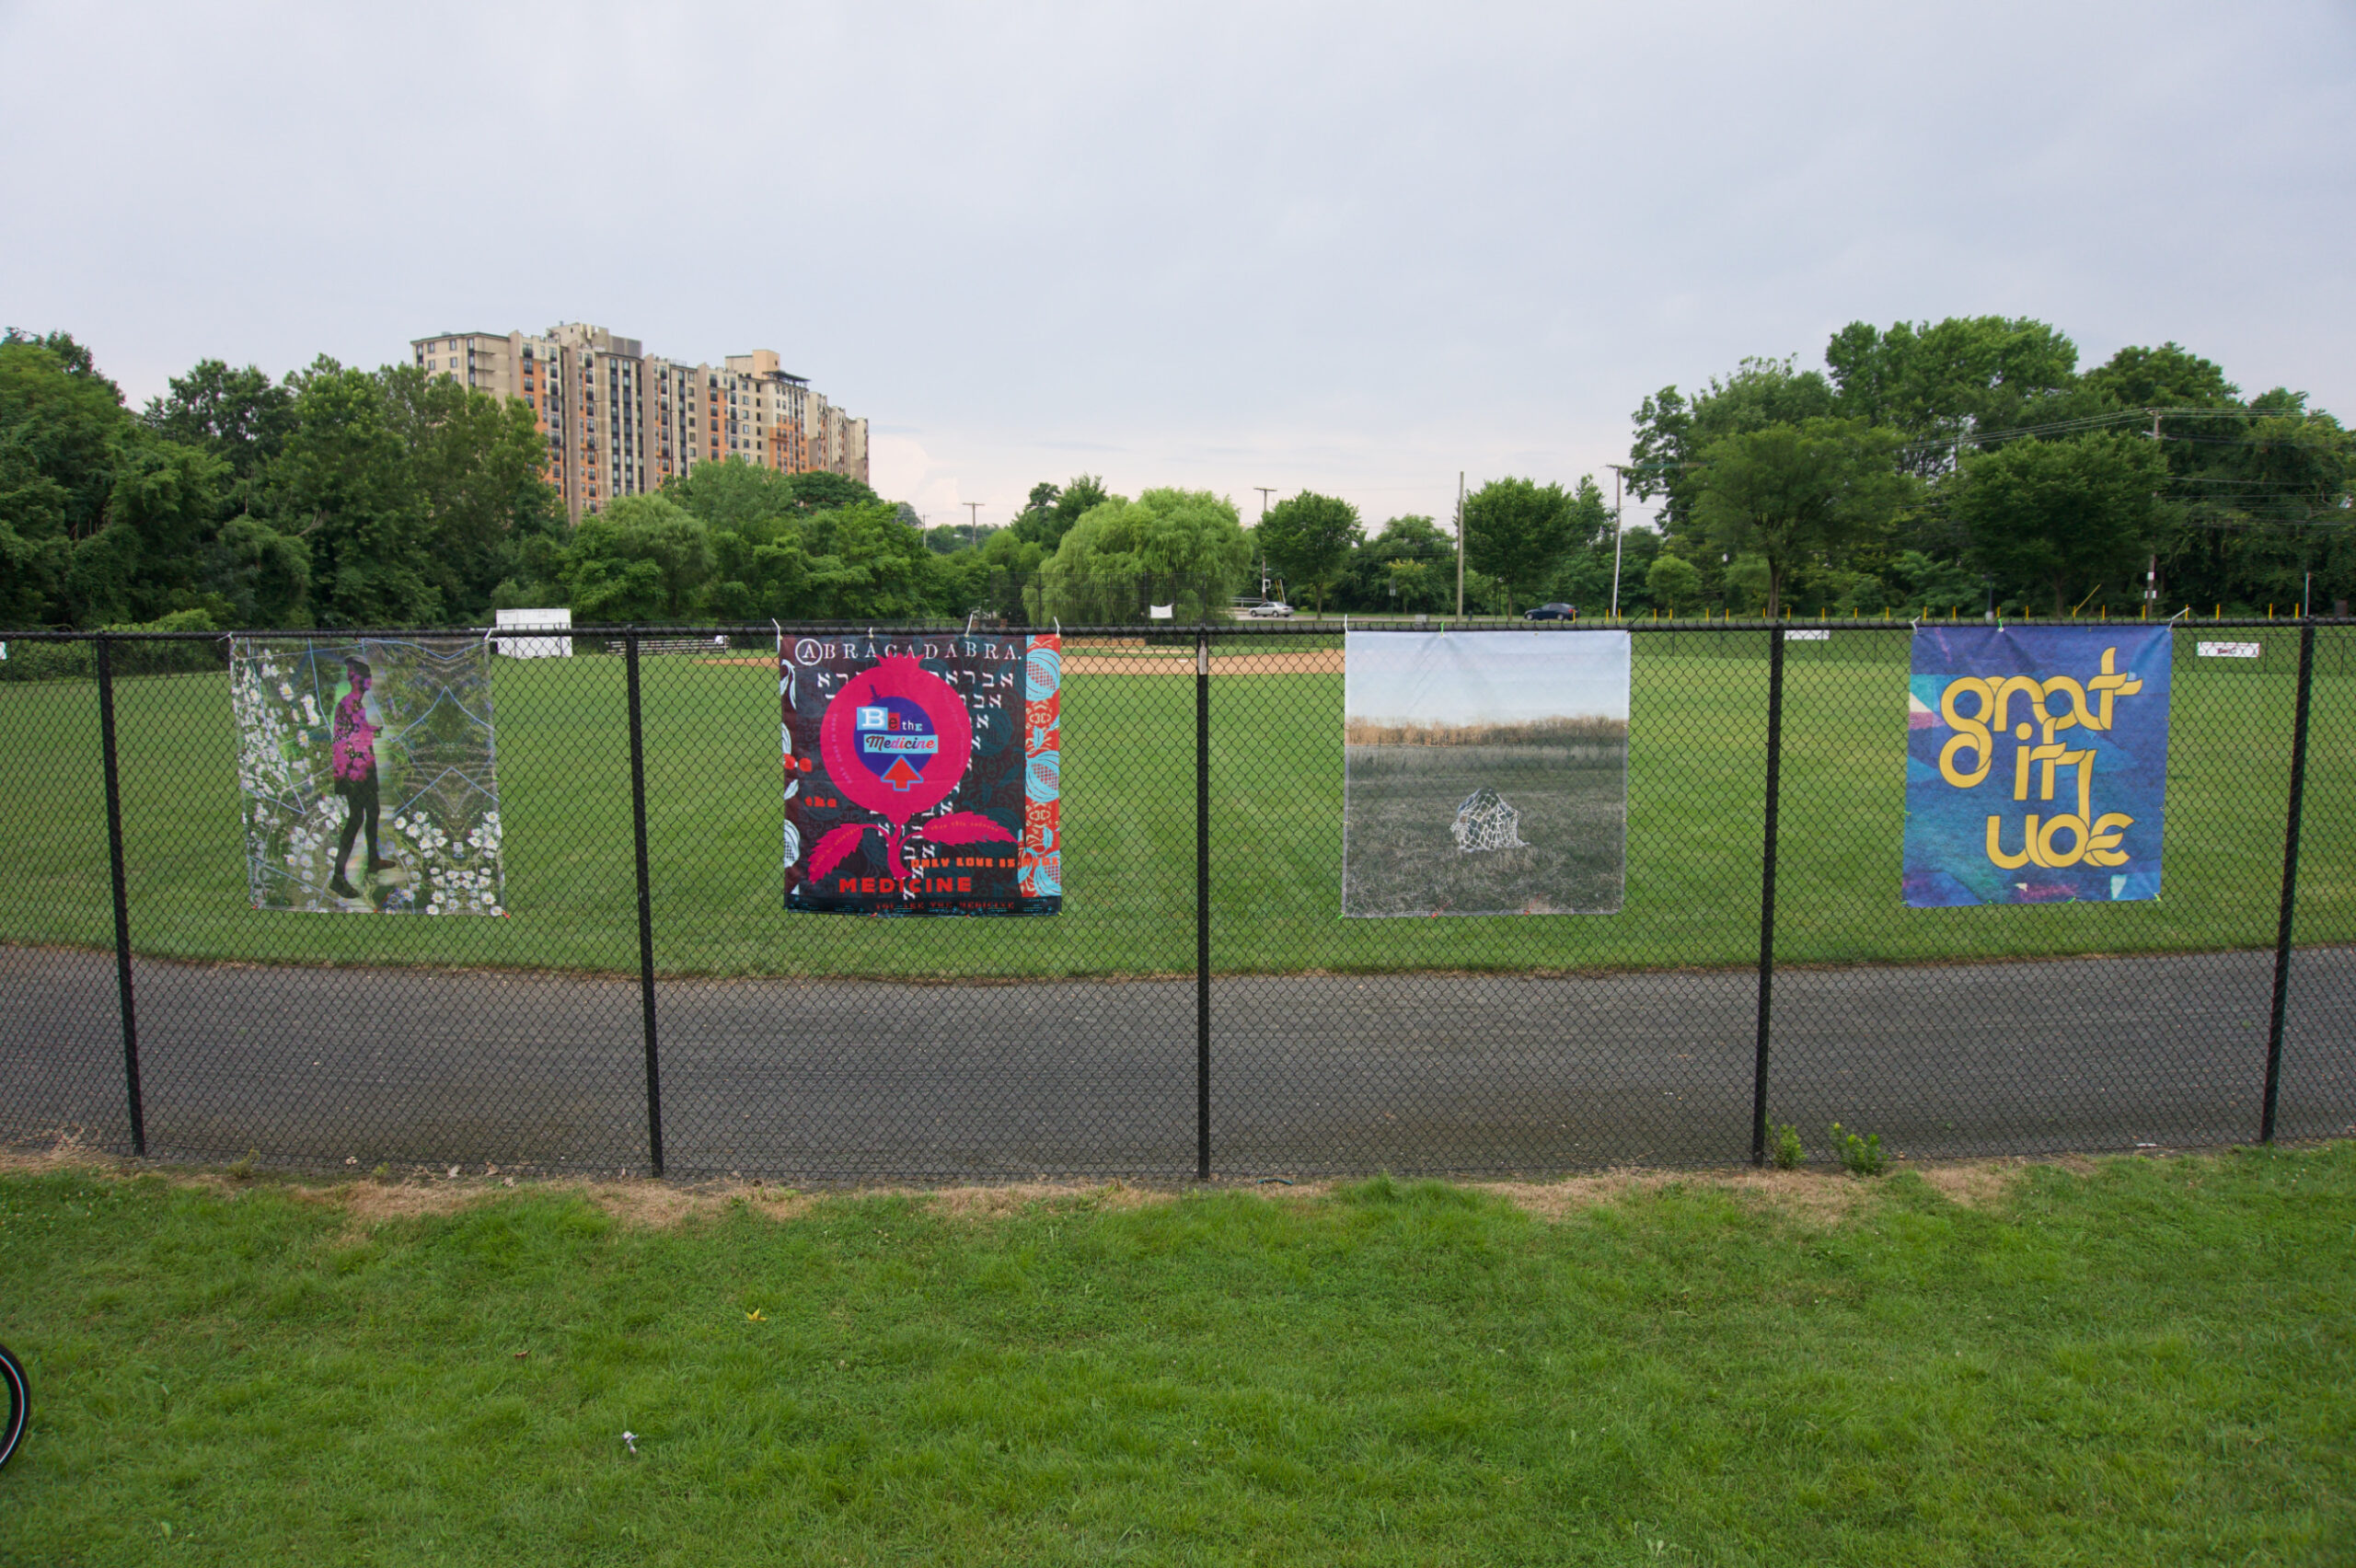 Four artworks hanging from a chain-link fence in Oxon Run Park, Washington, DC